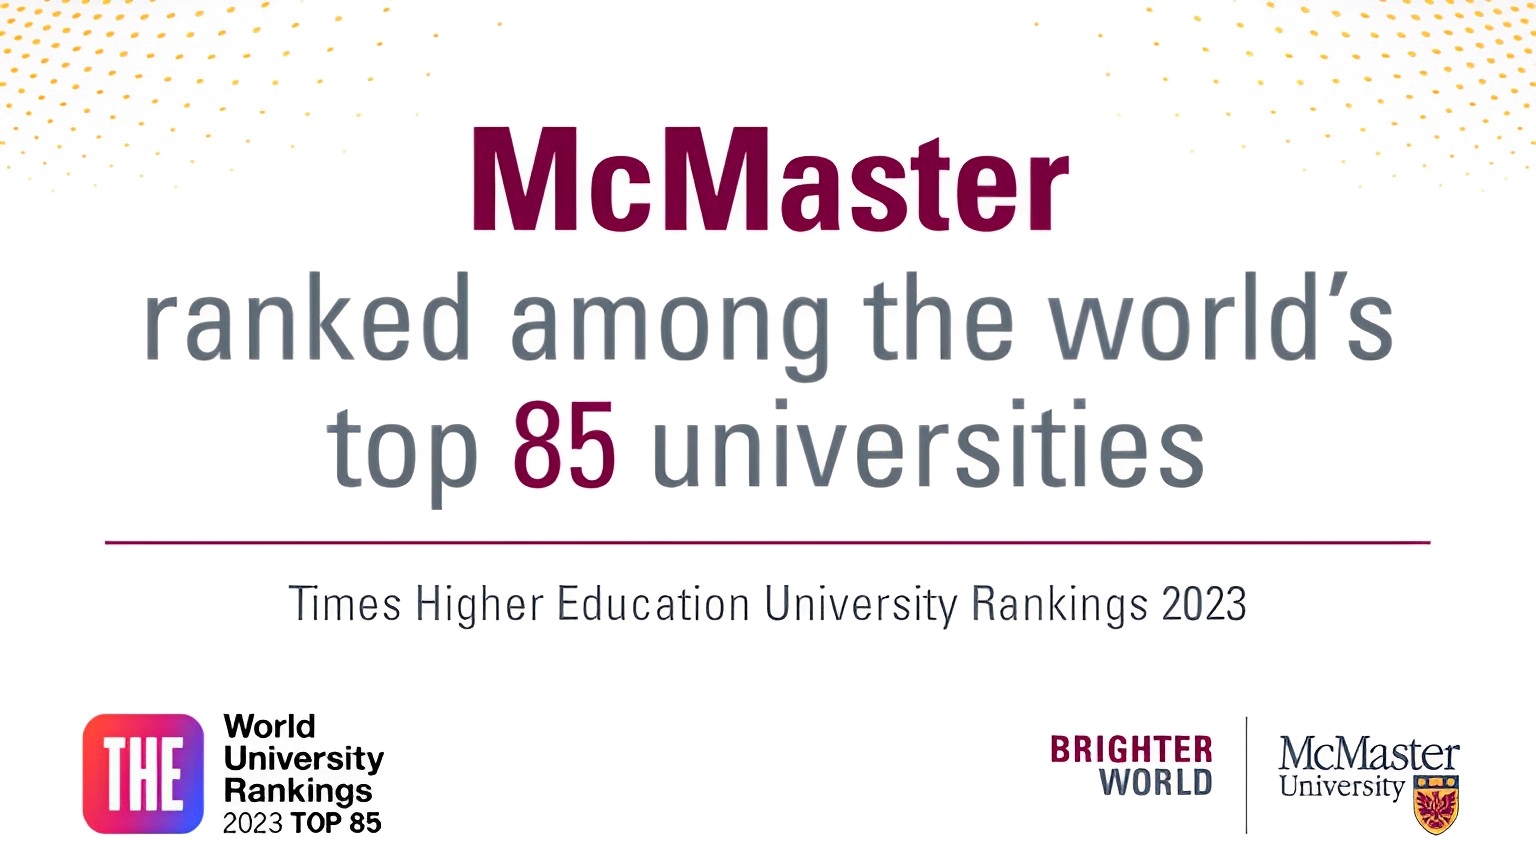 McMaster ranked amon the world's top 85 universities by Times Higher Education Ranking 2022